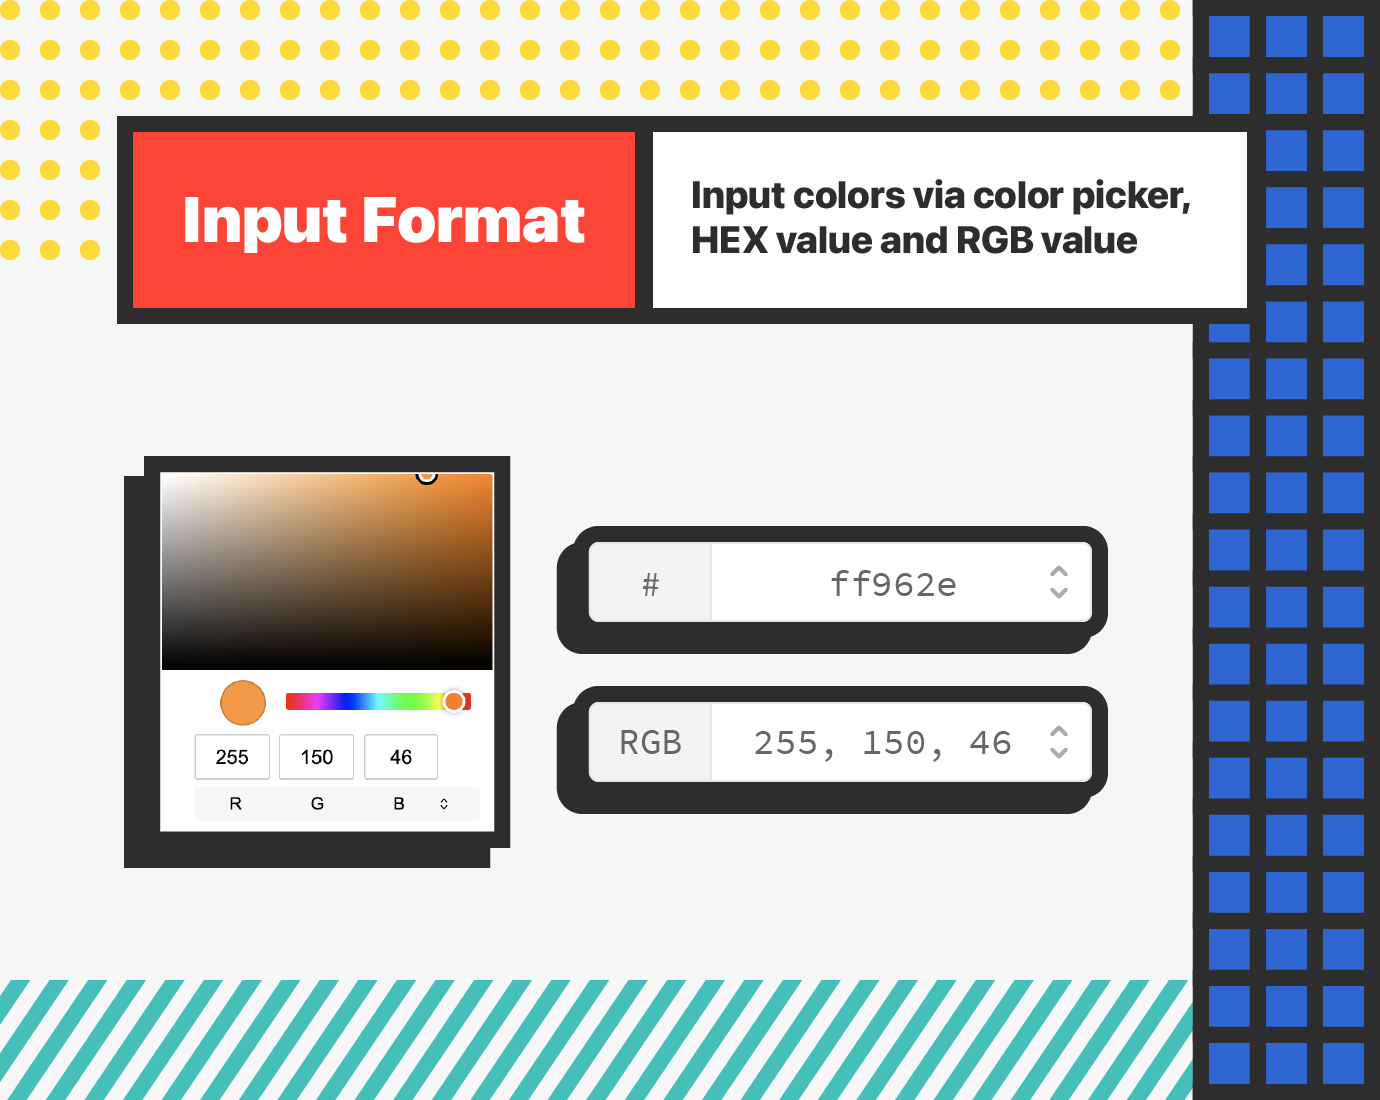 Input format - Input colors via color picker, HEX value and RGB value